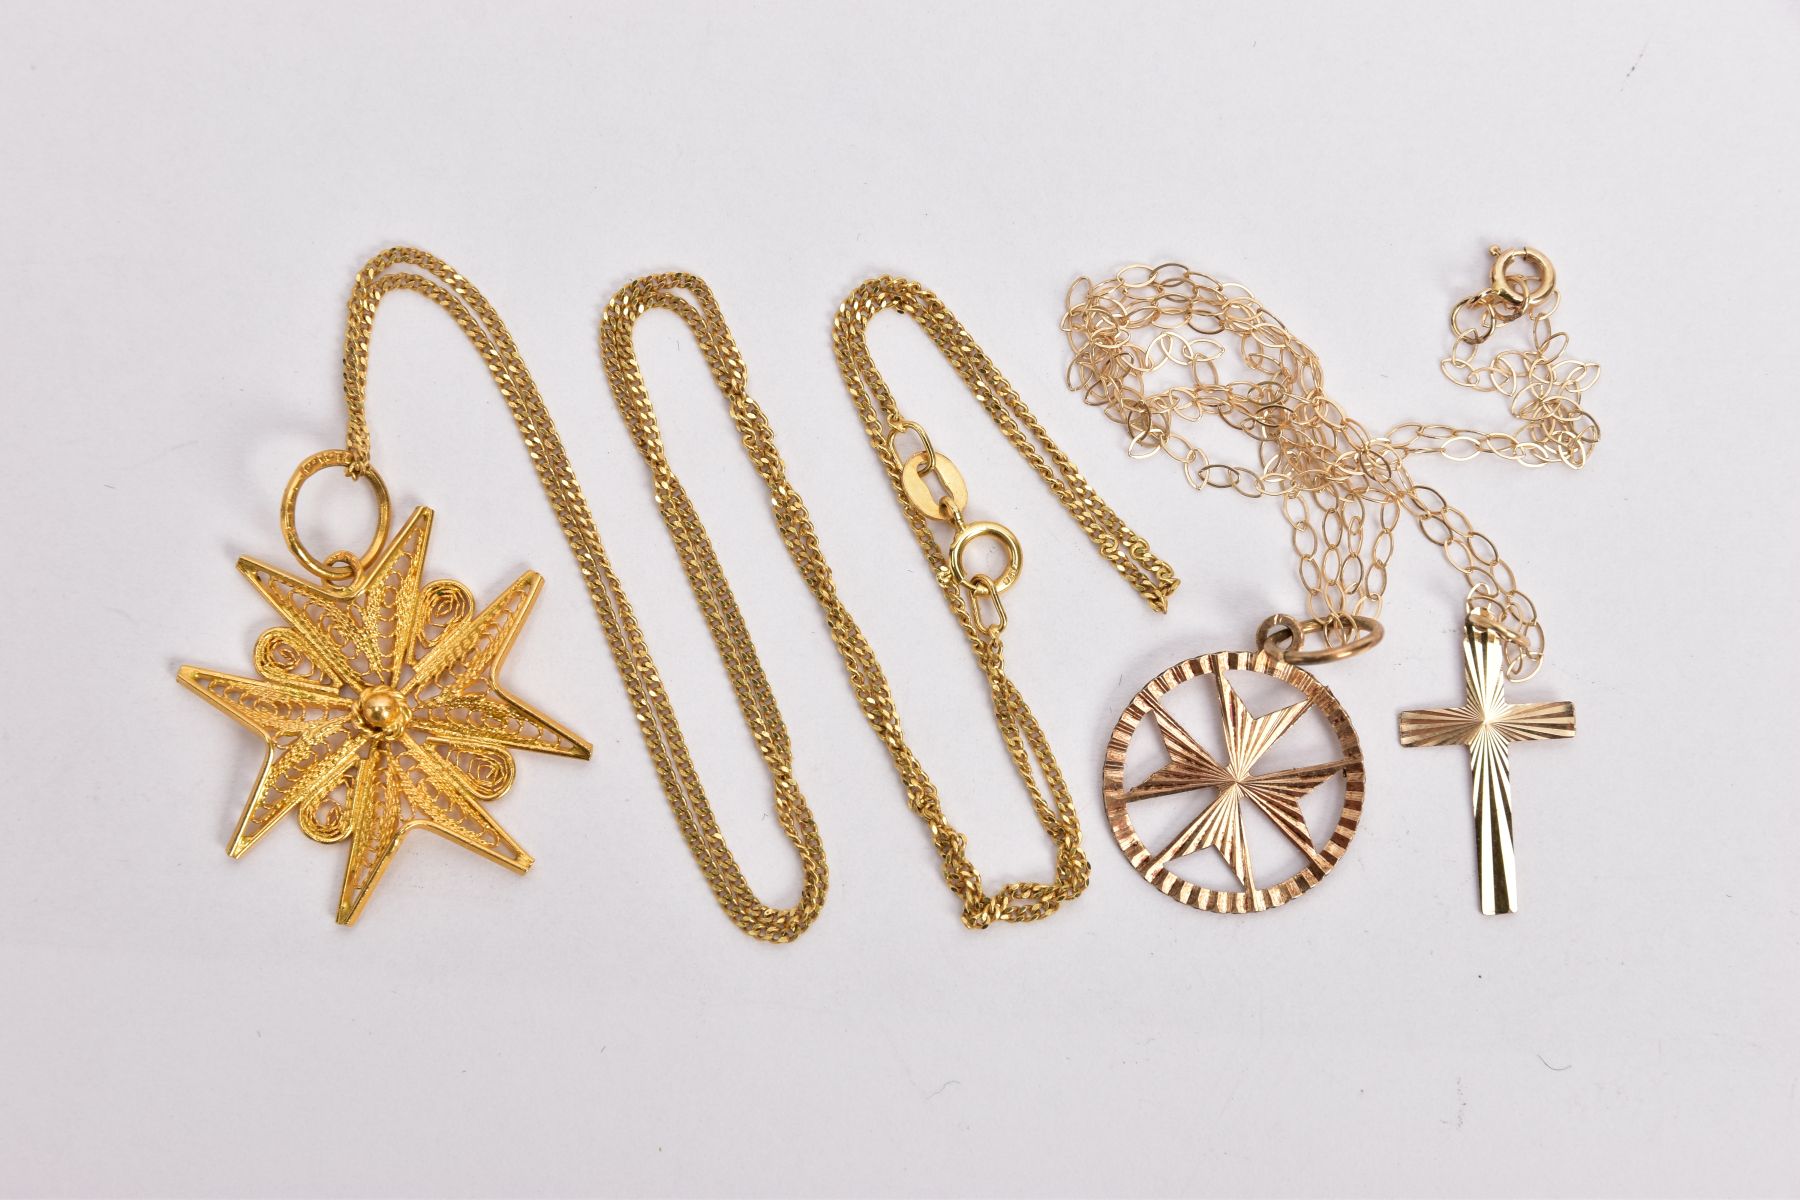 TWO PENDANT NECKLACES AND A YELLOW METAL PENDANT, to include a filigree Maltese pendant stamped '